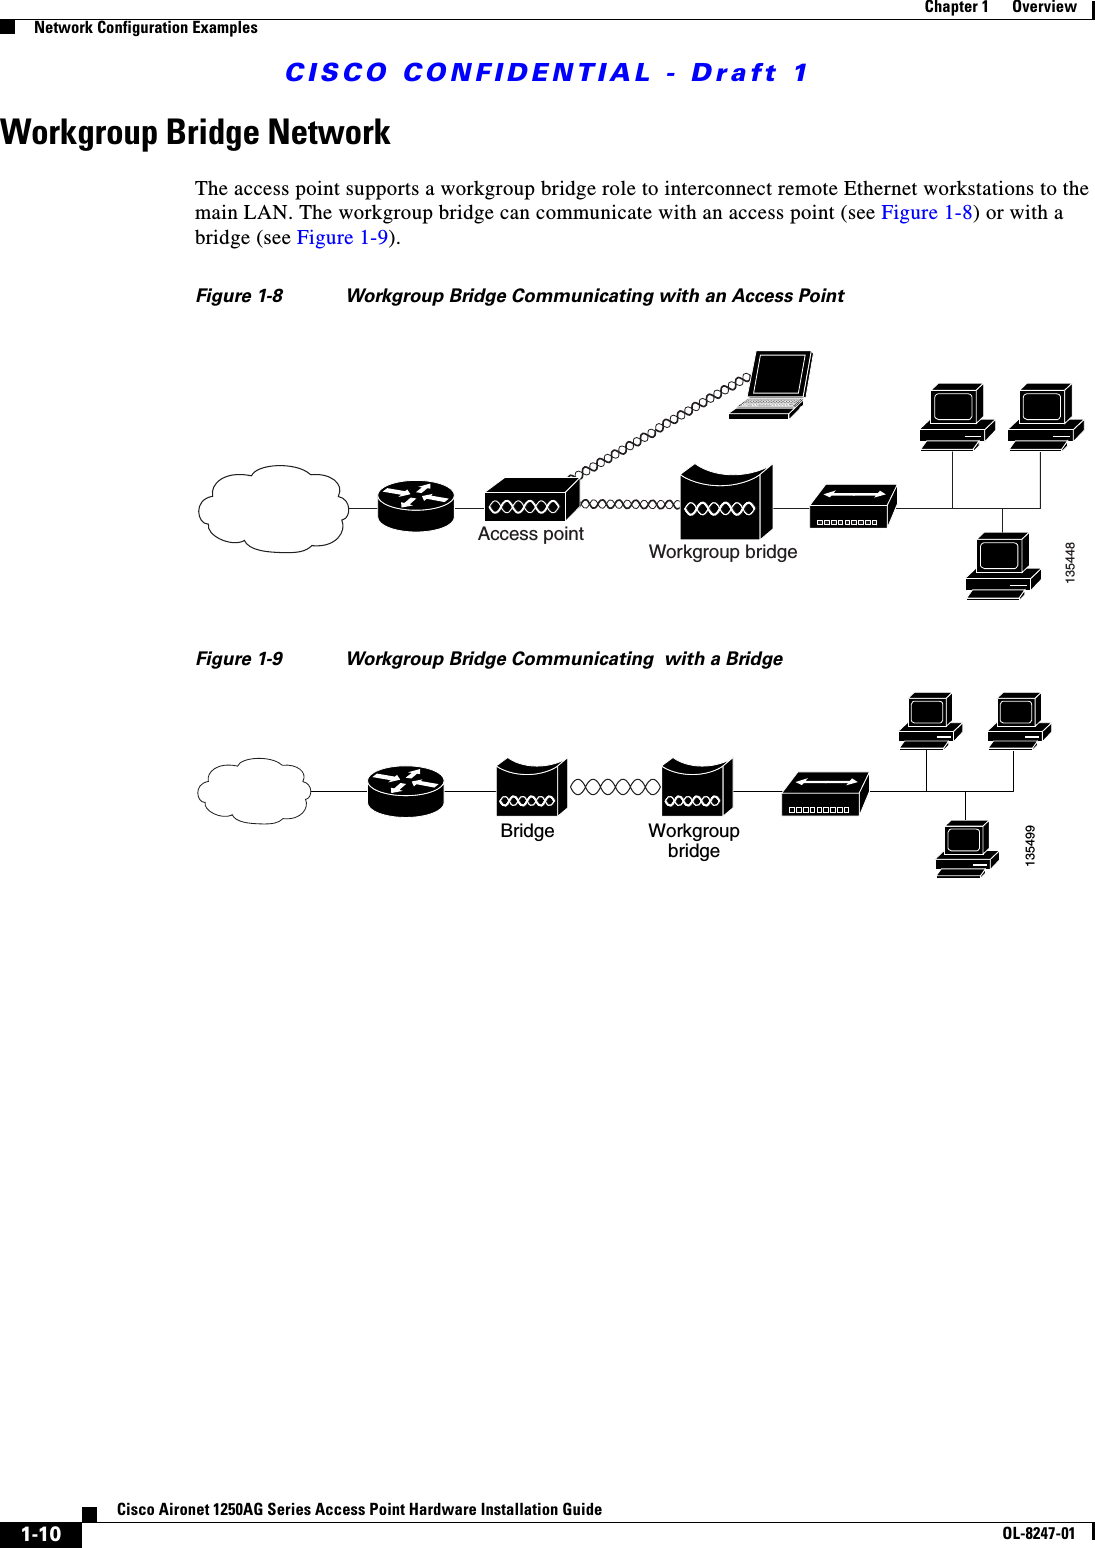 CISCO CONFIDENTIAL - Draft 11-10Cisco Aironet 1250AG Series Access Point Hardware Installation GuideOL-8247-01Chapter 1      OverviewNetwork Configuration ExamplesWorkgroup Bridge NetworkThe access point supports a workgroup bridge role to interconnect remote Ethernet workstations to the main LAN. The workgroup bridge can communicate with an access point (see Figure 1-8) or with a bridge (see Figure 1-9).Figure 1-8 Workgroup Bridge Communicating with an Access Point Figure 1-9 Workgroup Bridge Communicating  with a Bridge Access pointWorkgroup bridge135448Bridge Workgroupbridge135499